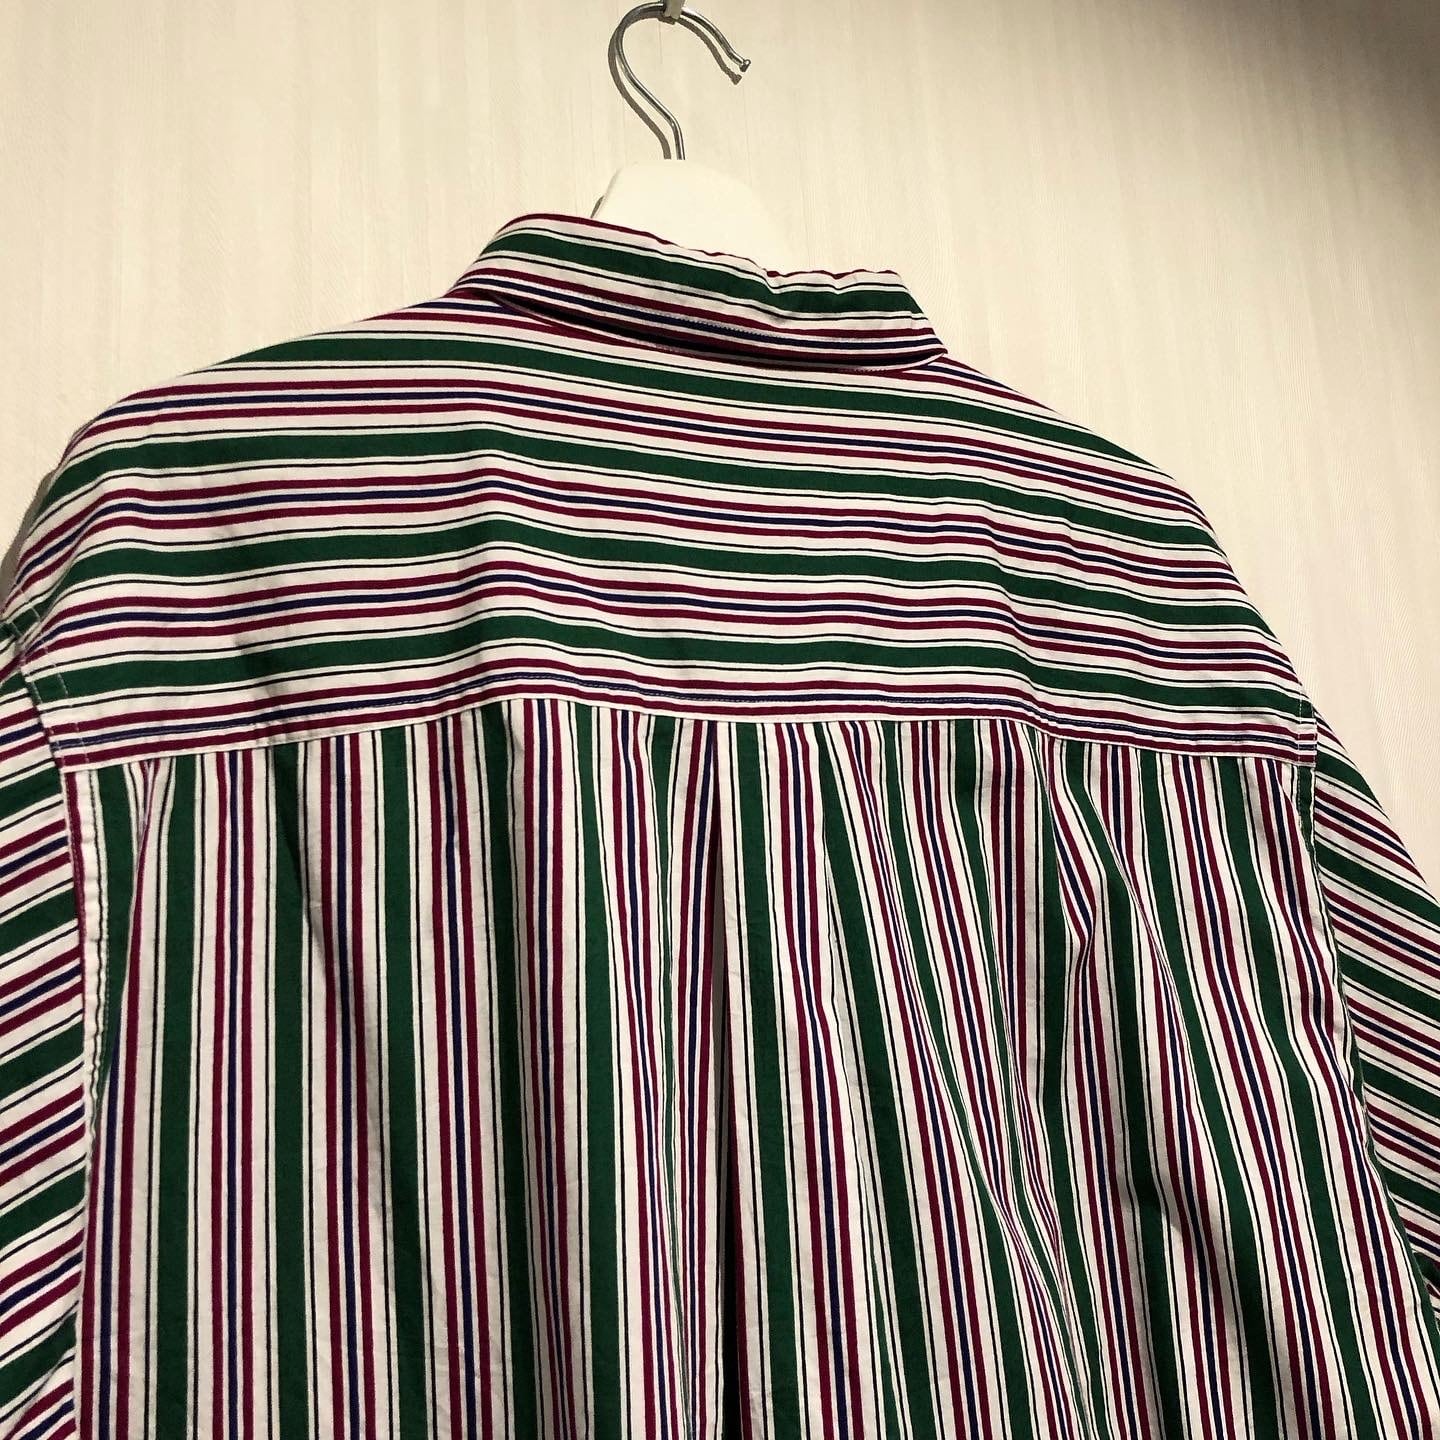 90s Christian Dior MONSIEUR stripe L/S shirt【高円寺店】 | What’z up powered by  BASE